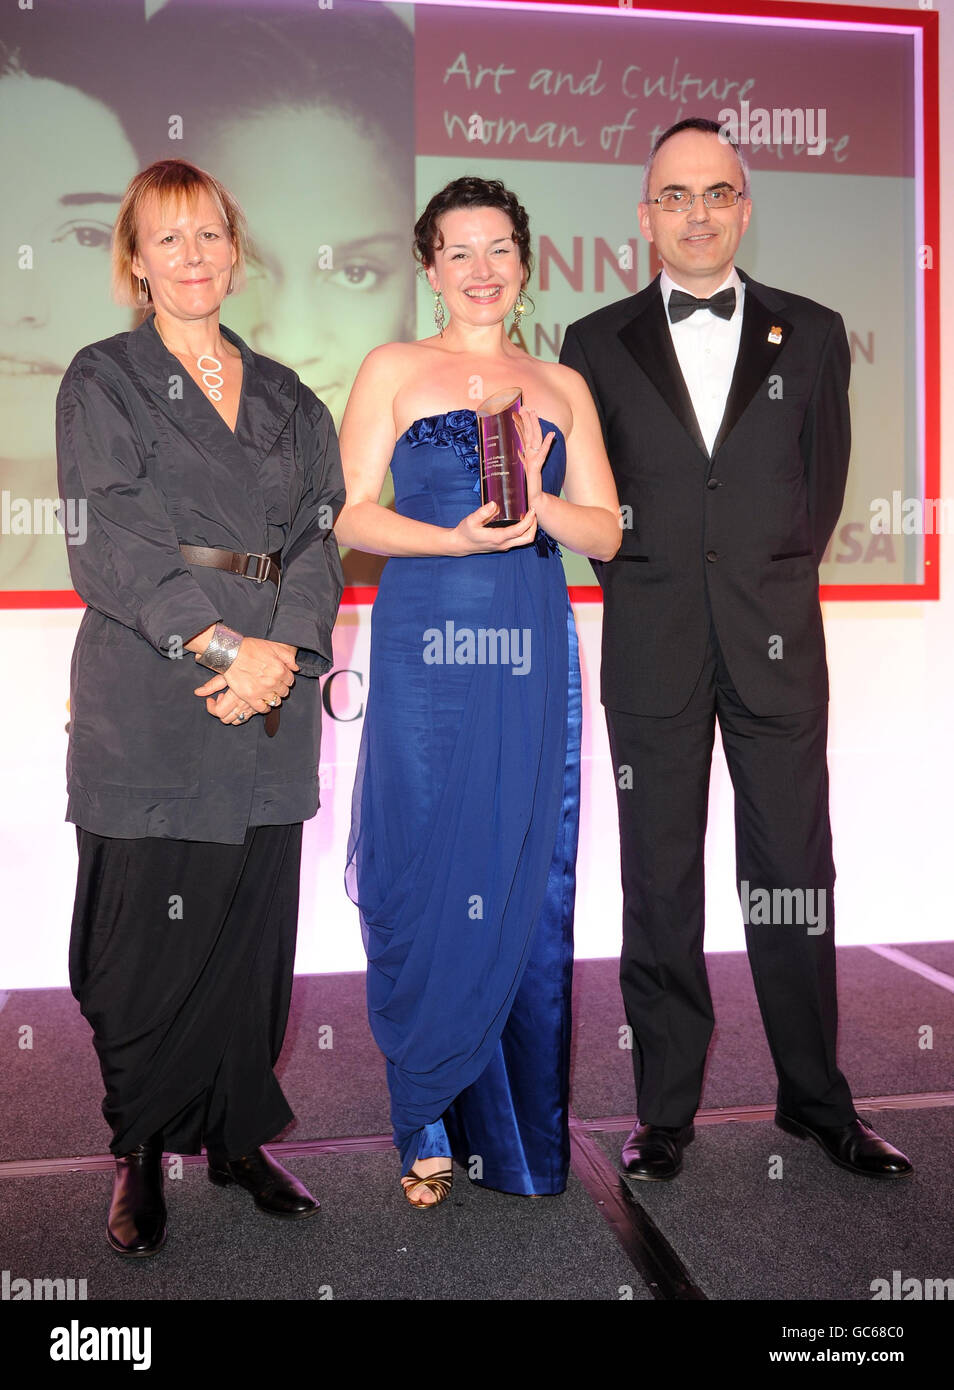 Dianne Pilkington, 34, (centre) who is currently playing one of the lead roles in 'Wicked' is awarded Art and Culture Woman of the Future by Phyllida Lloyd (left) and David Harrison (right) at the Women of the Future event at the Marriott Hotel, London. Stock Photo